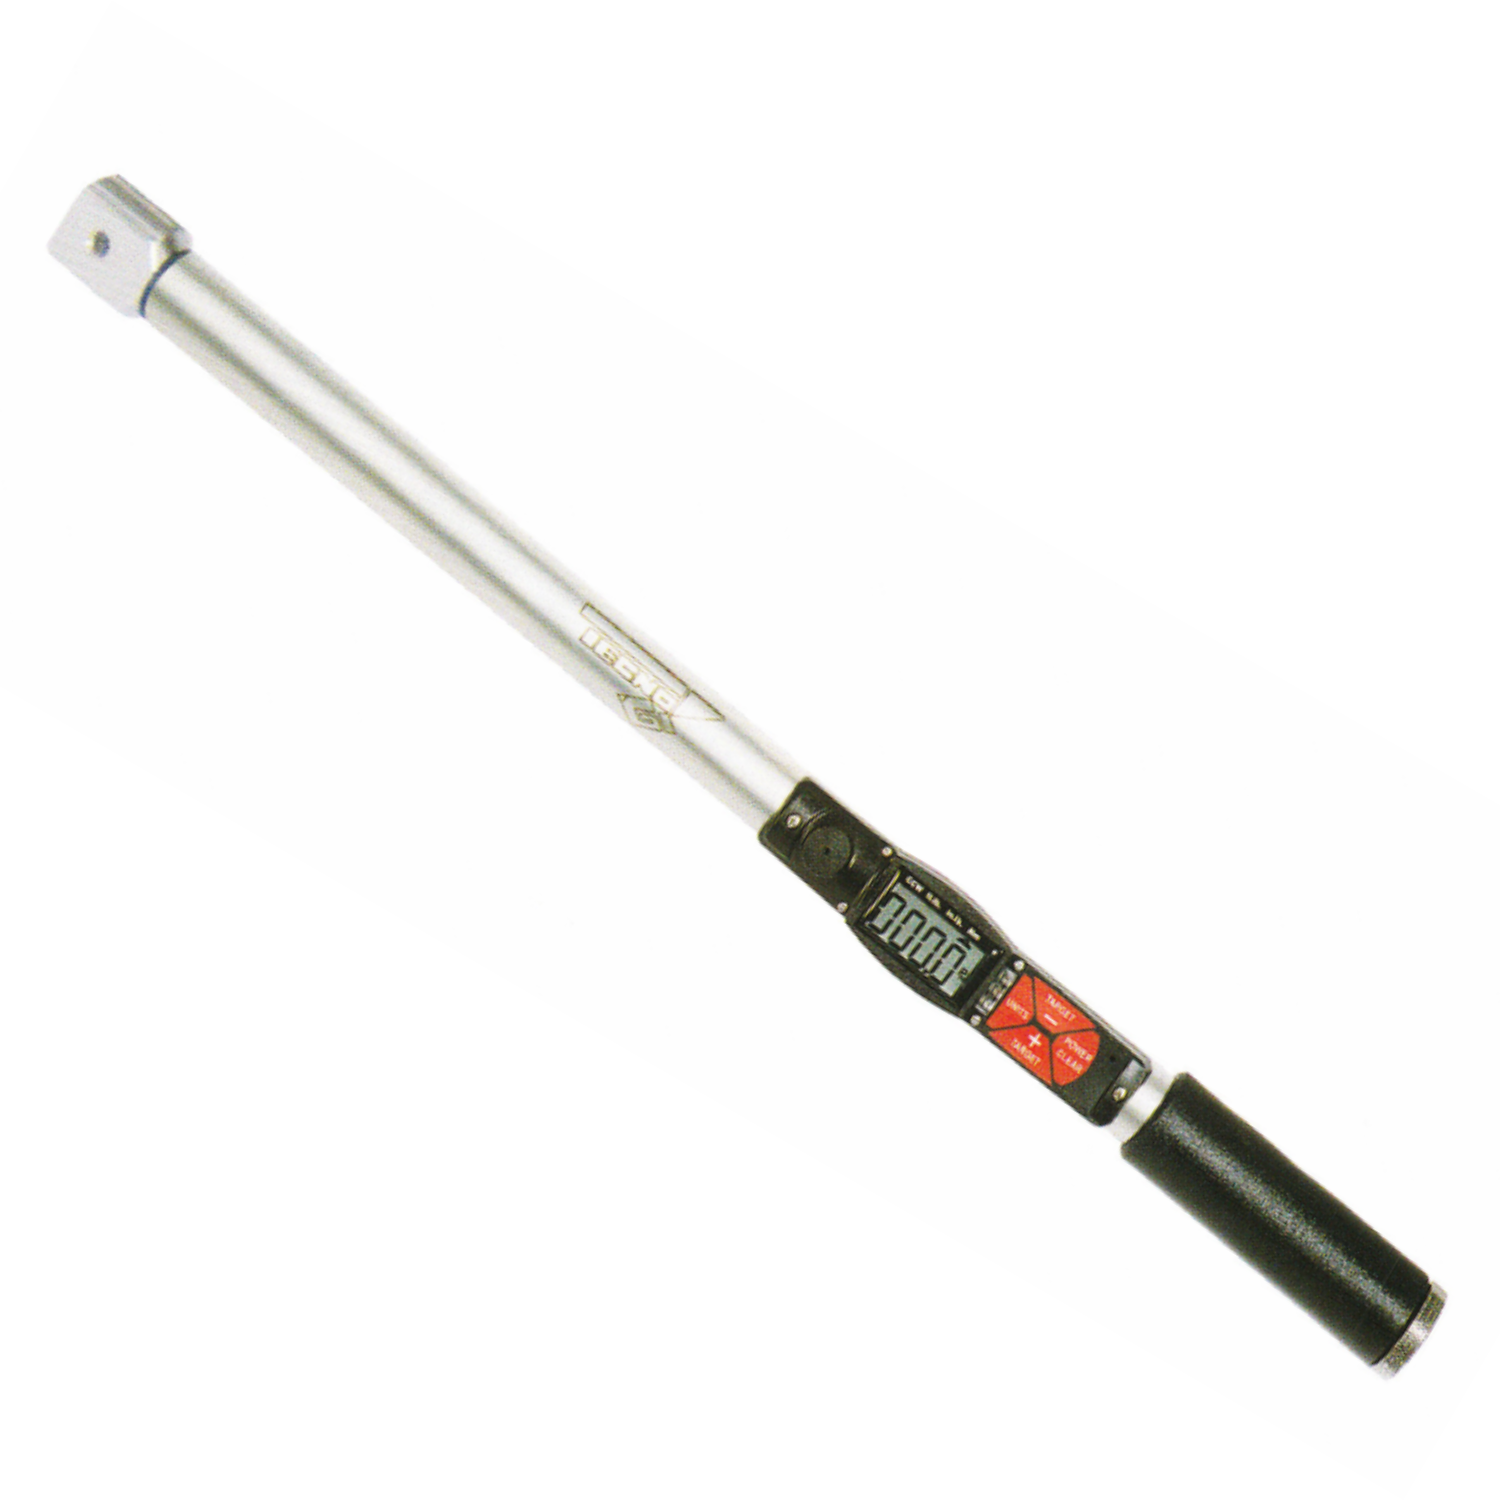 TECNOGI 3503F Digital Torque Wrench with 9x12 Rotating Head 381mm - Premium Digital Torque Wrench from TECNOGI - Shop now at Yew Aik.